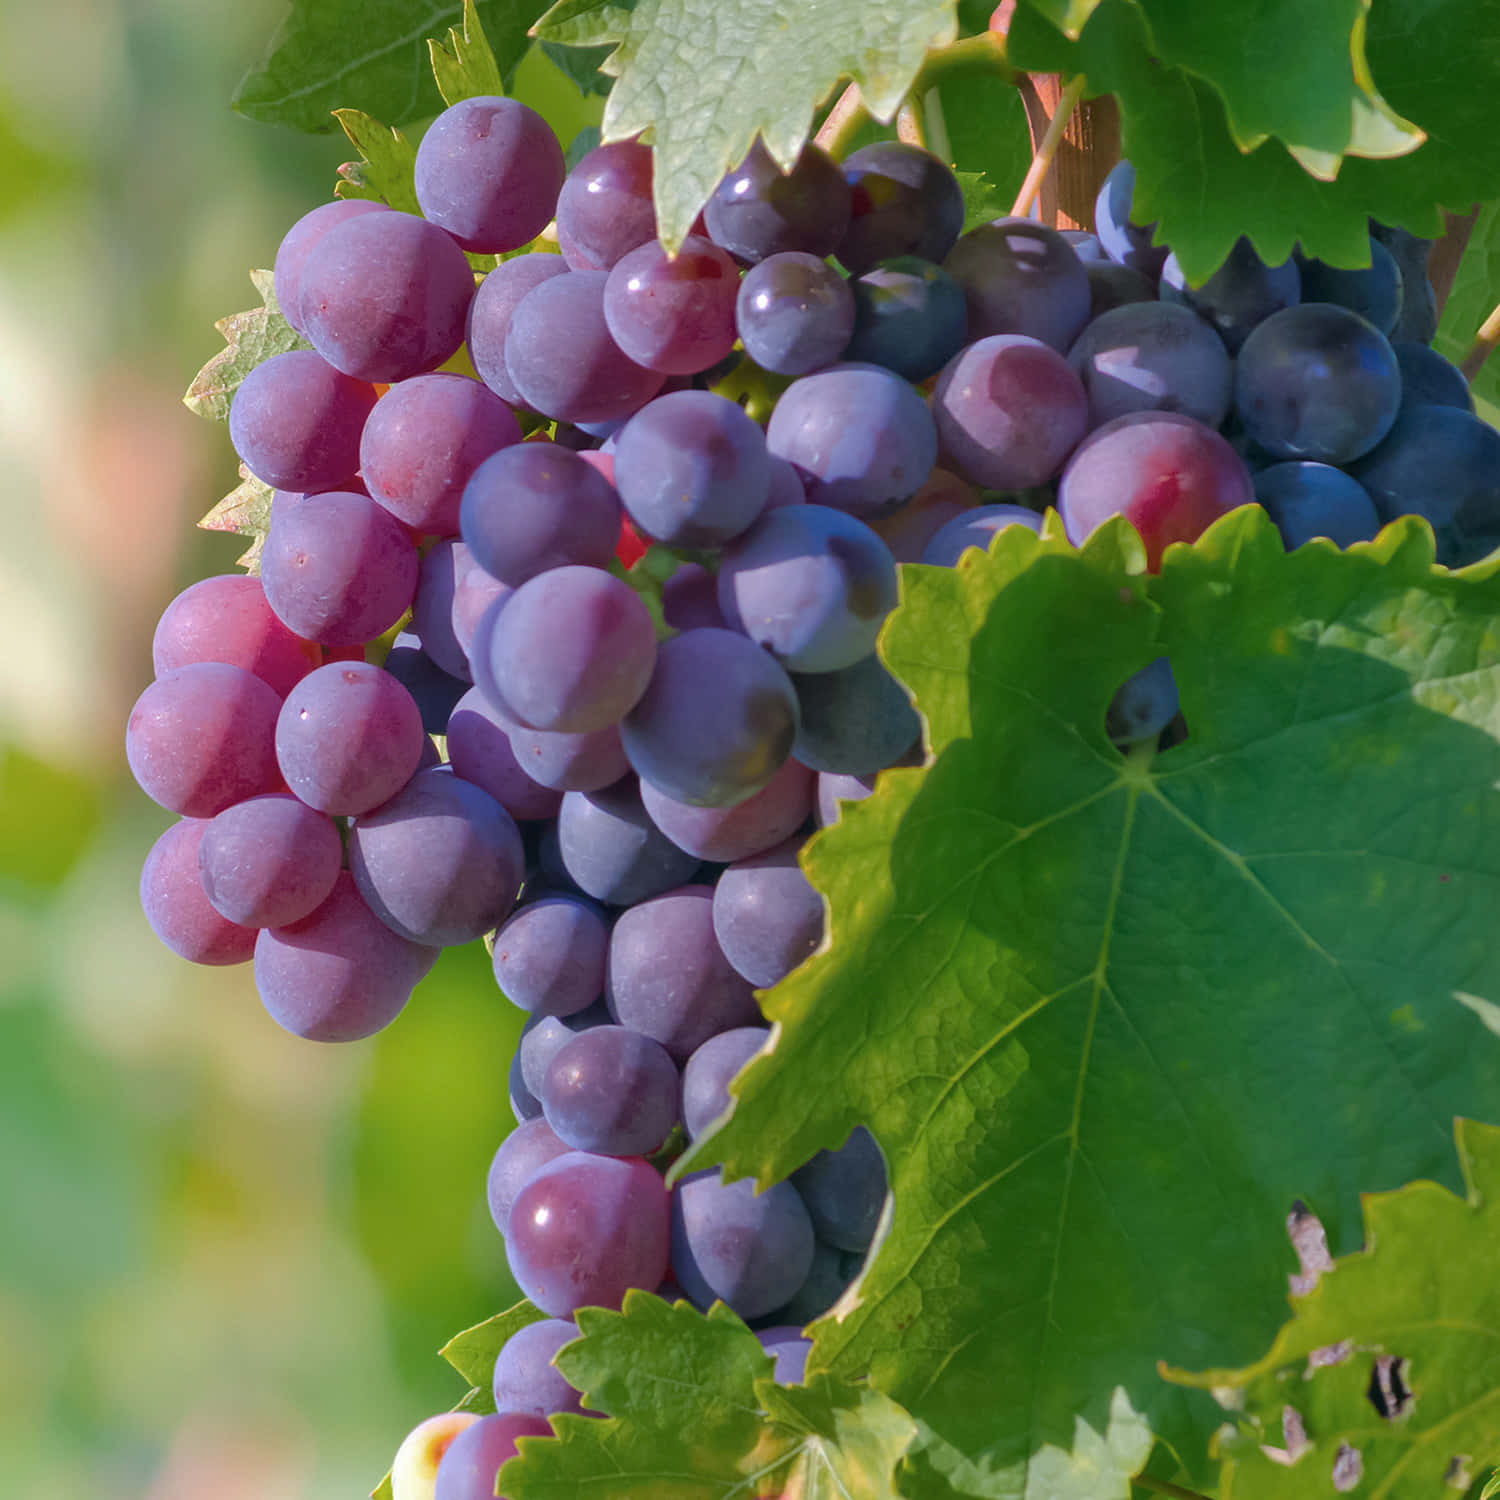 Bunch of fresh, juicy grapes